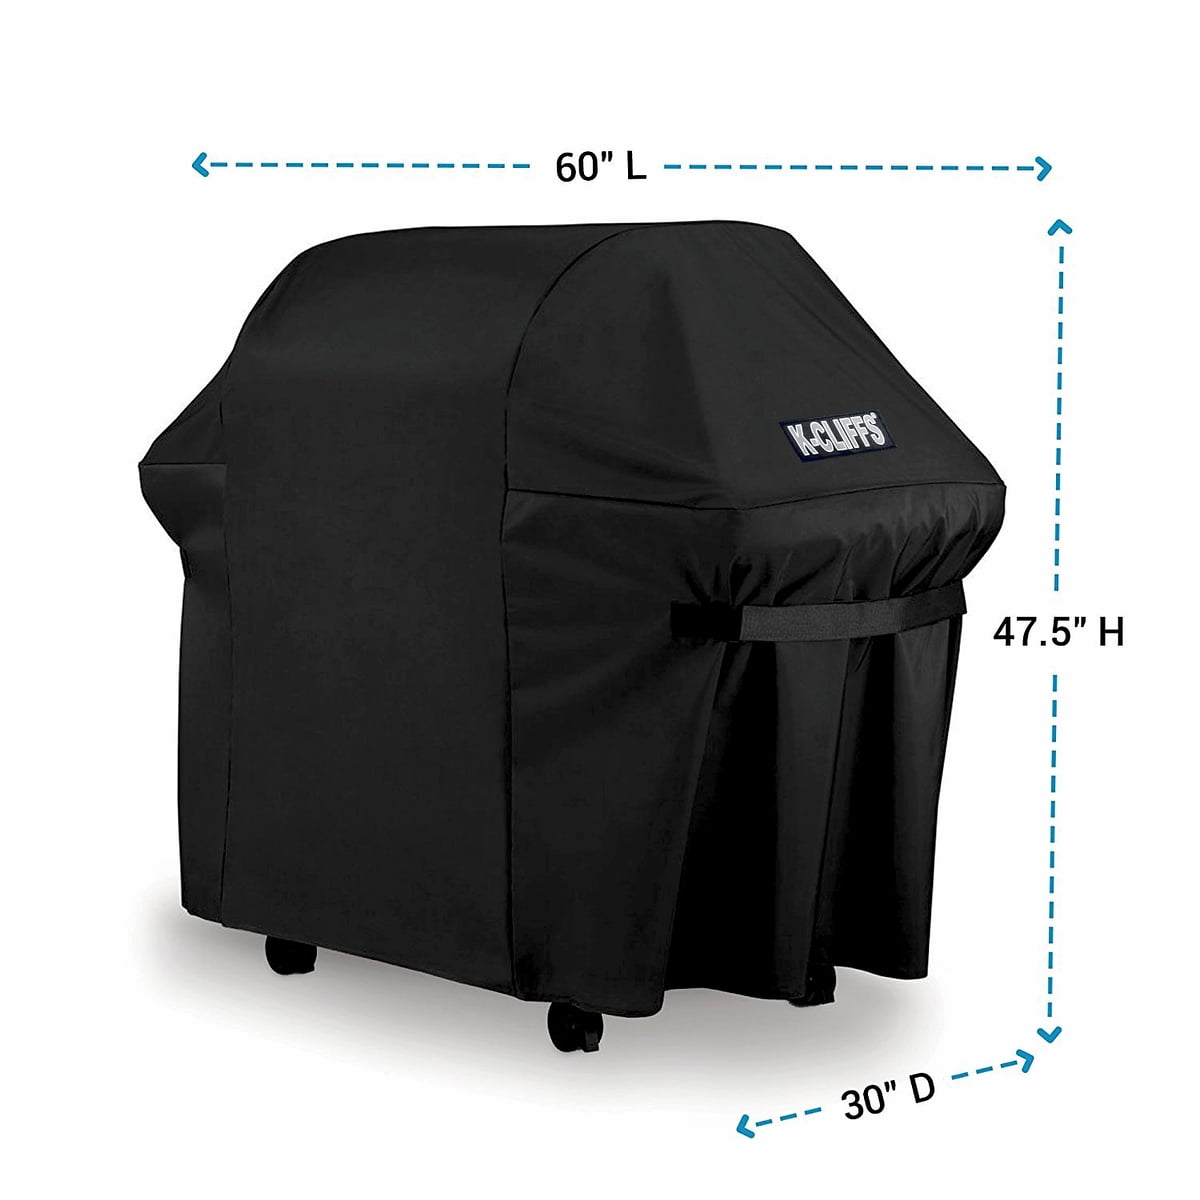 Outdoor Garden BBQ Barbecue Grill Cover Tool Waterproof Dustproof Table Cover C